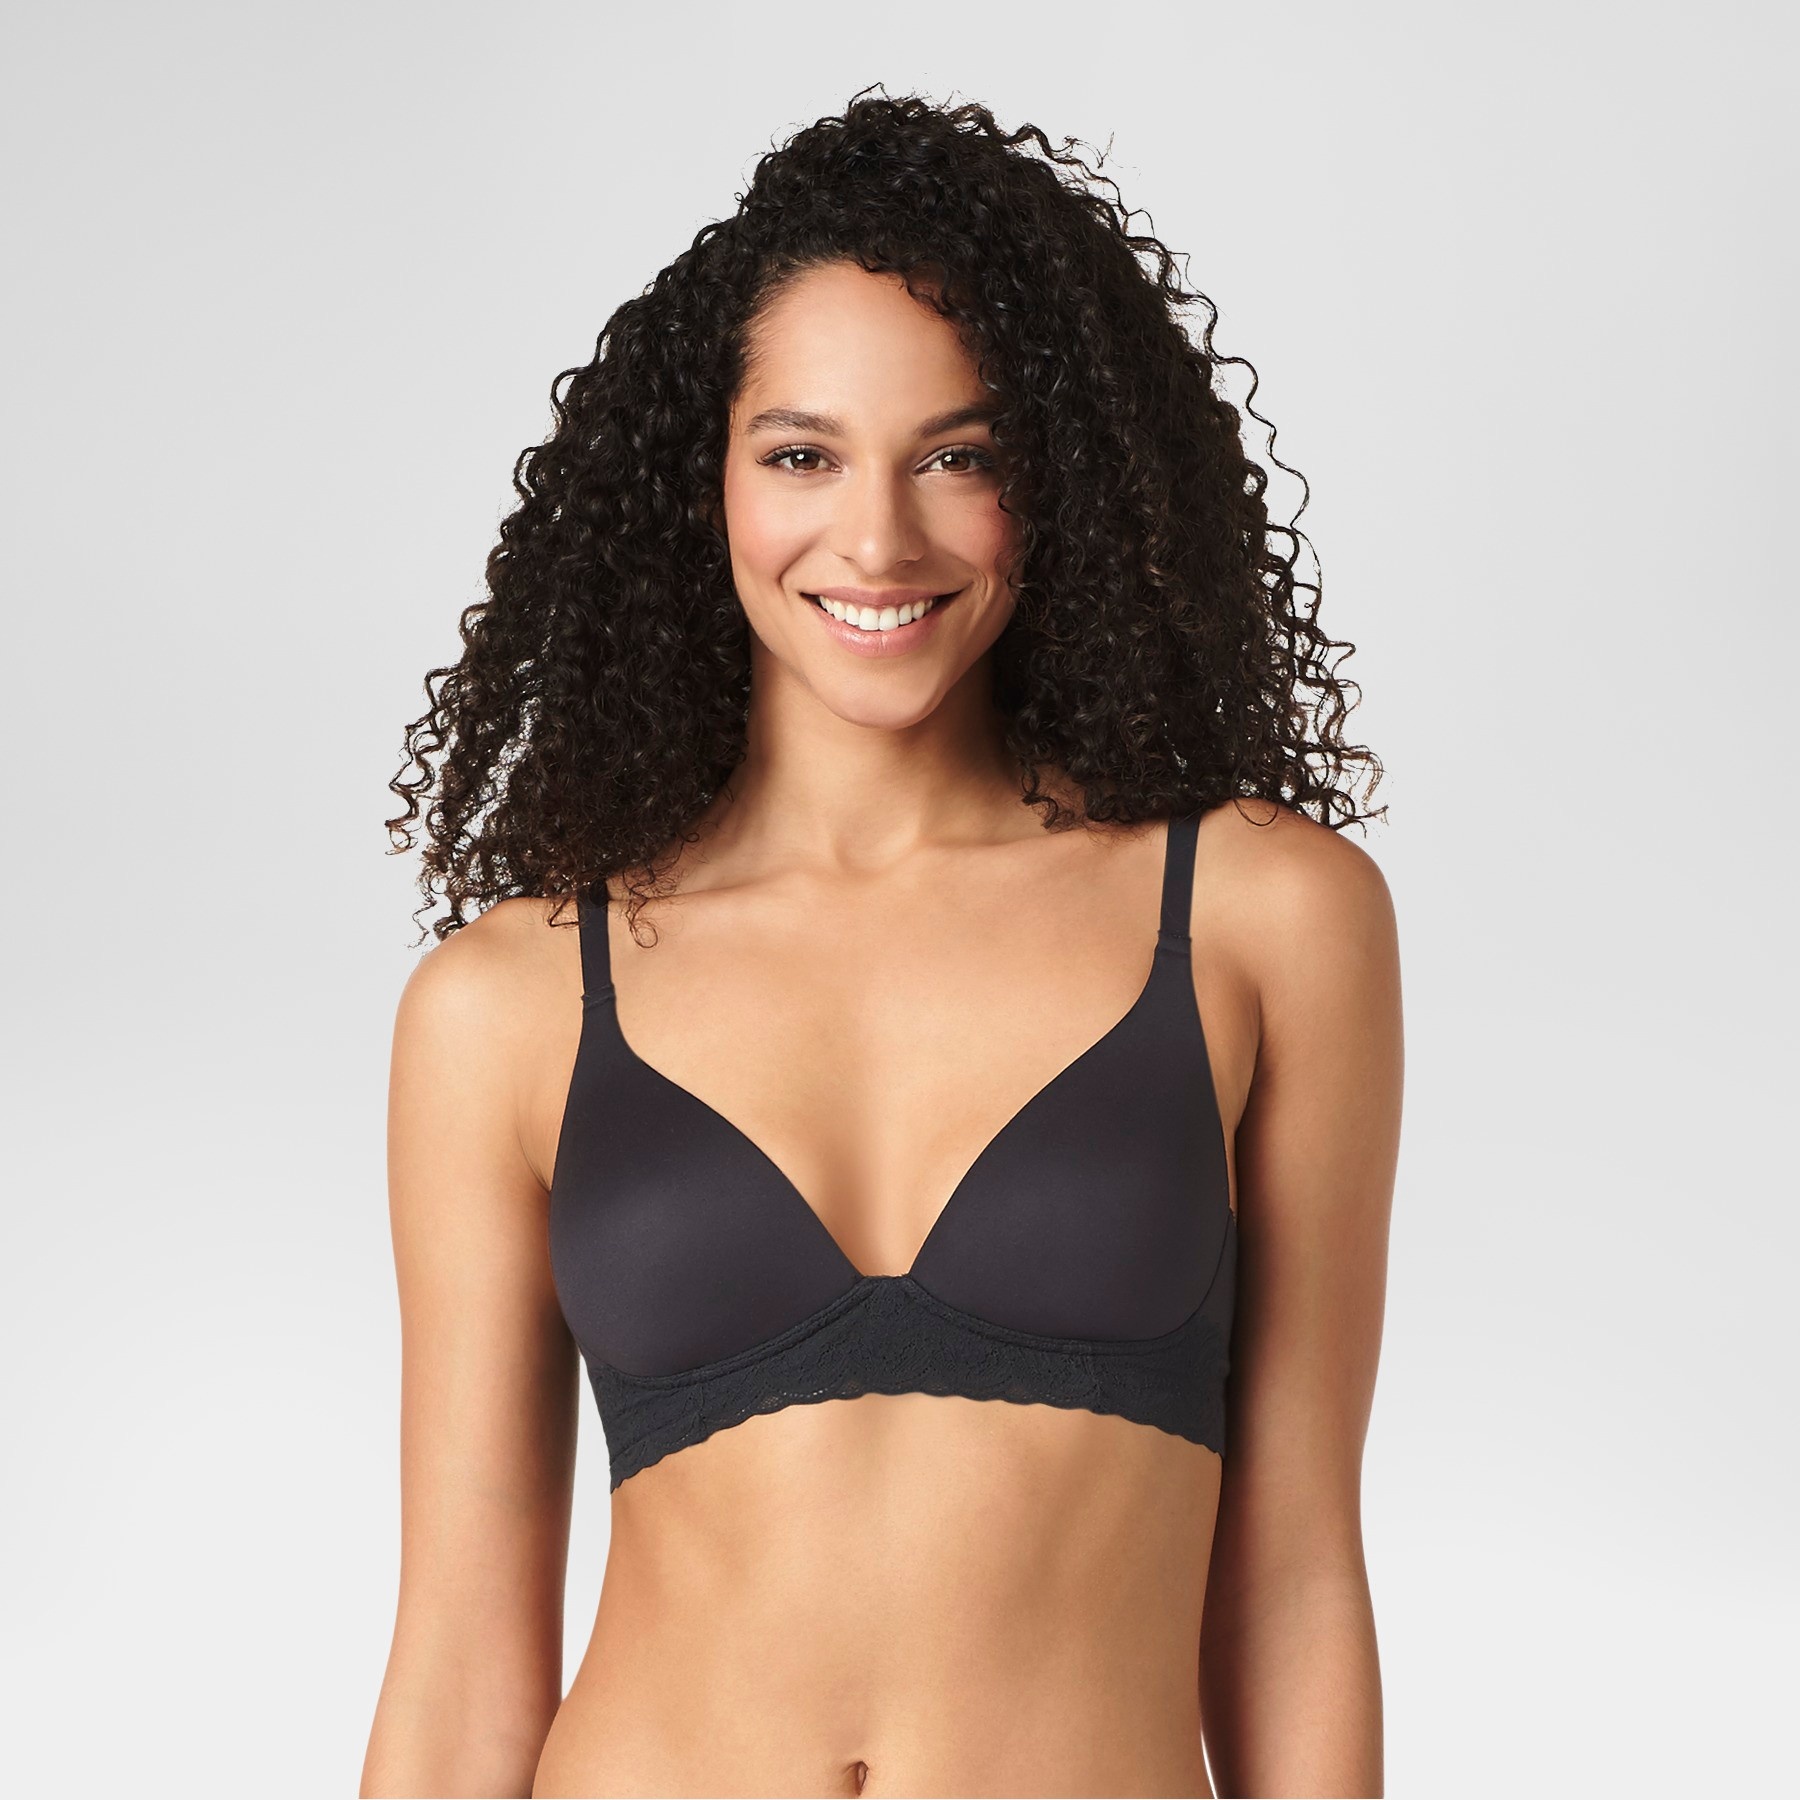 Simply Perfect by Warner's Women's Supersoft Wirefree Bra - Black 40C